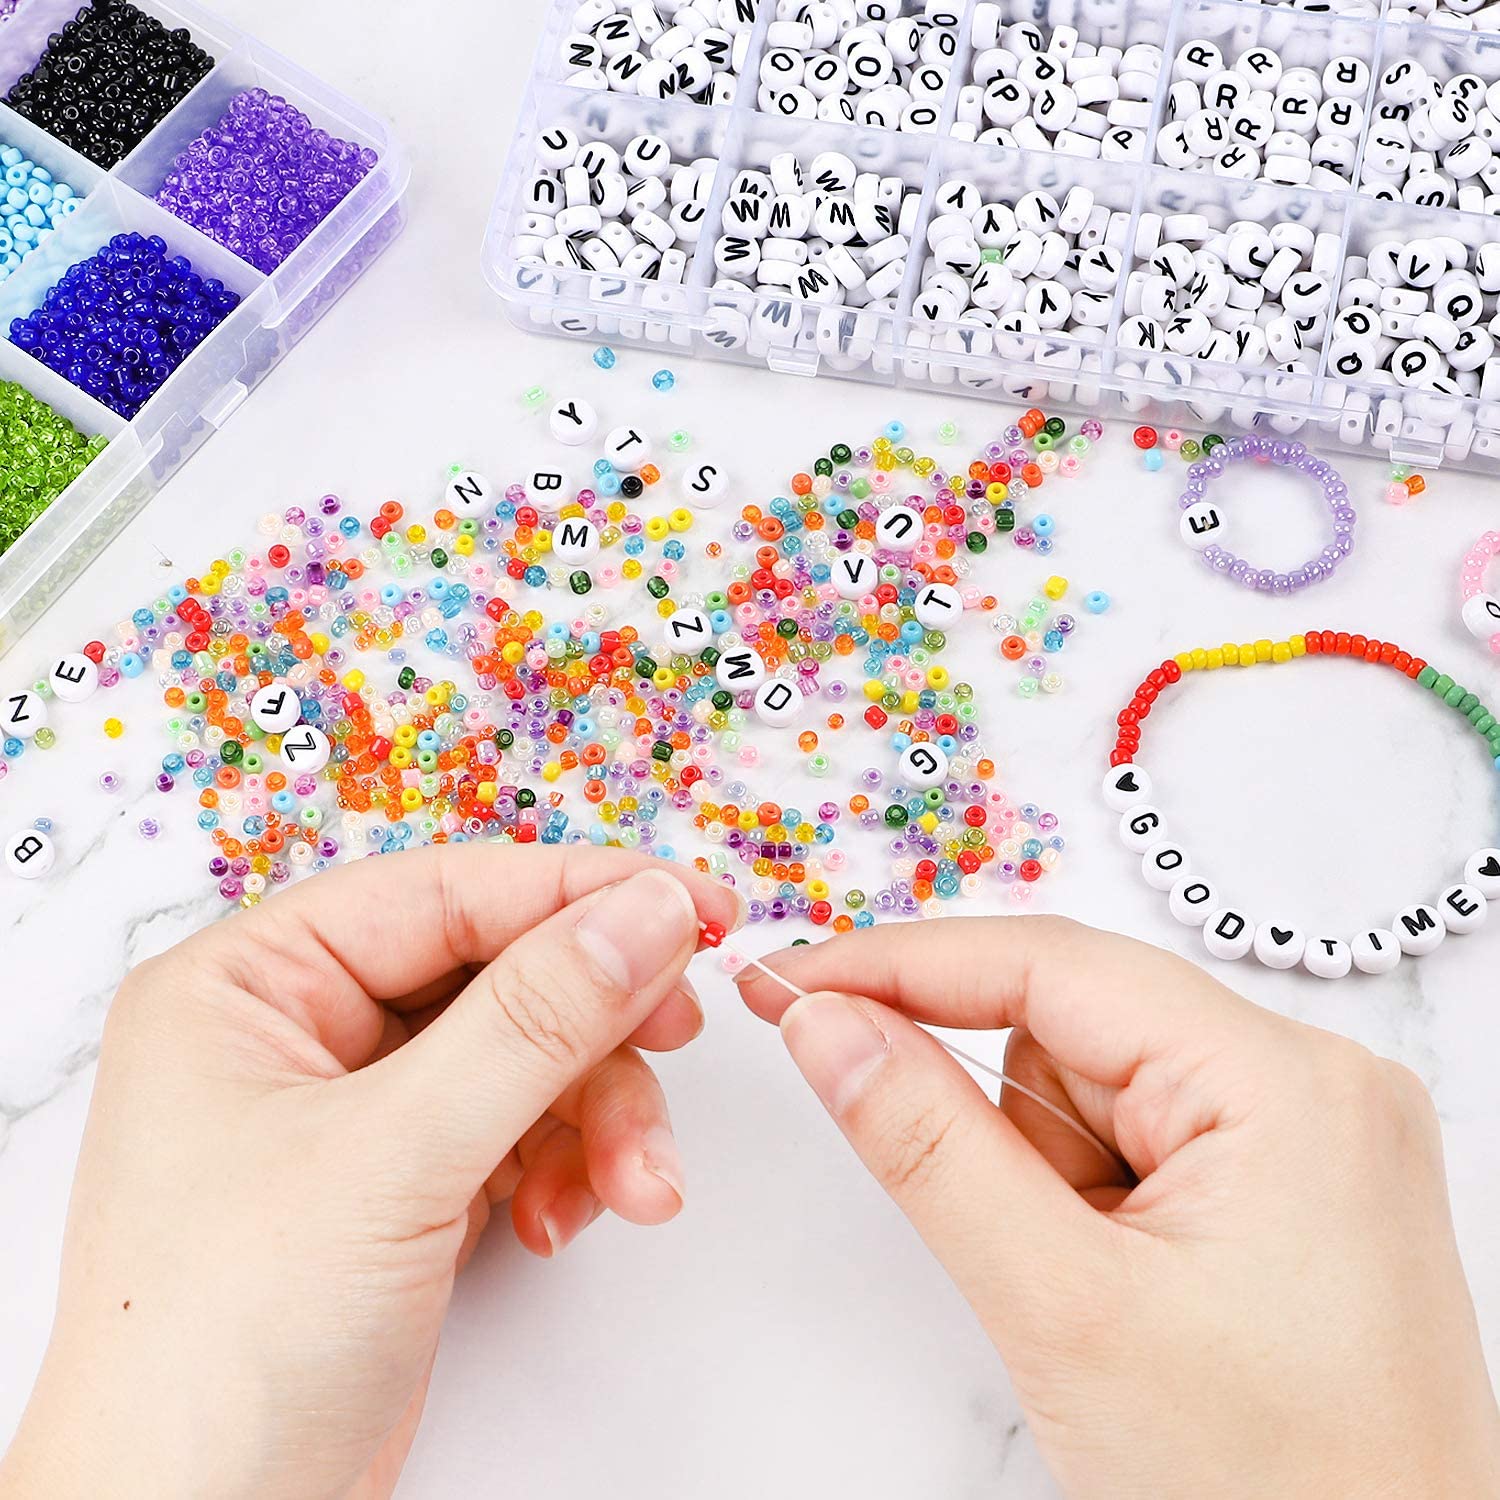 600+pcs Aster Bibivisa DIY Beads Set Flowers Gift for Girls 4 Years up Princess Style Box Craft Toys Jewelry Making Kits DIY Bracelets Necklaces Pearls Beads 24 Shapes of Kitty Bows for Kids 